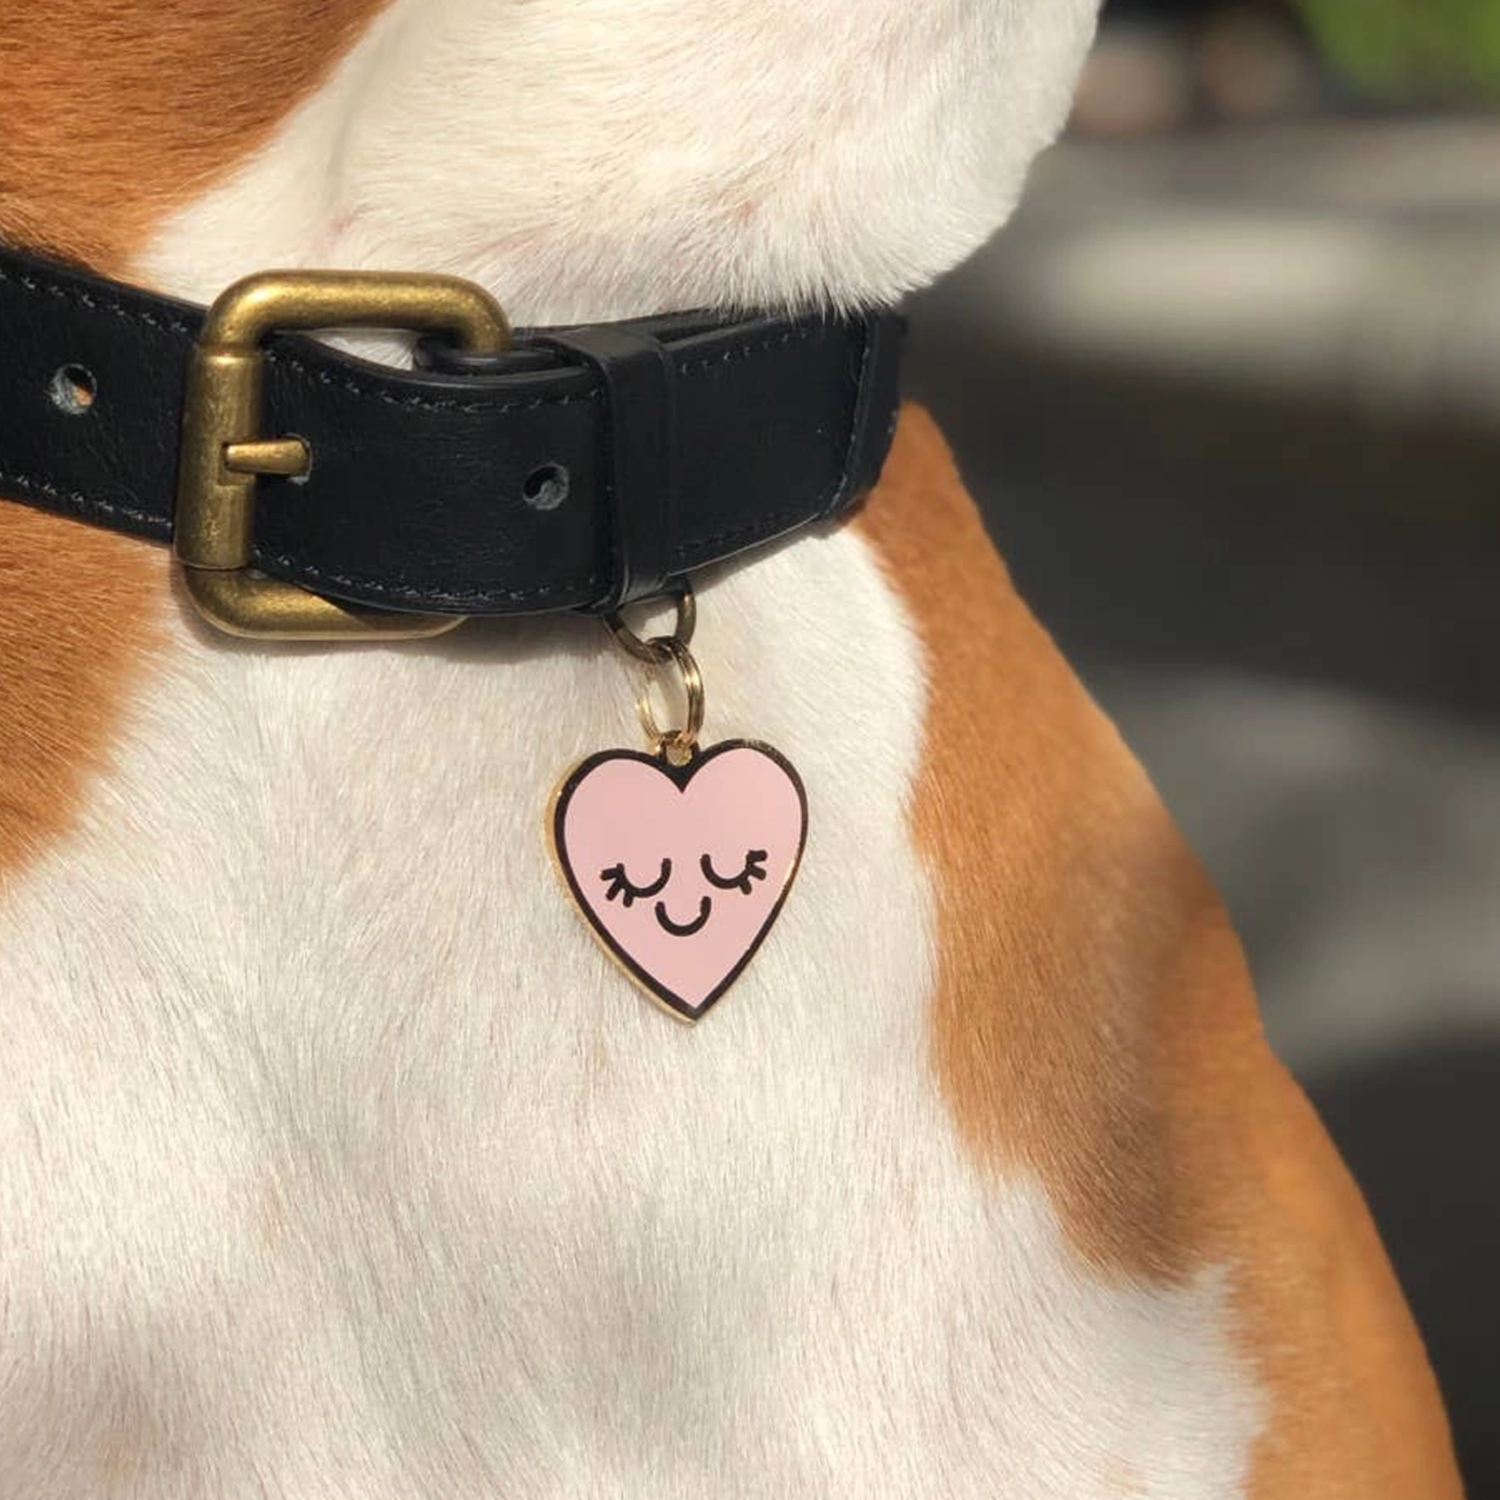 Dog wearing Smiling Heart Pet ID Tag